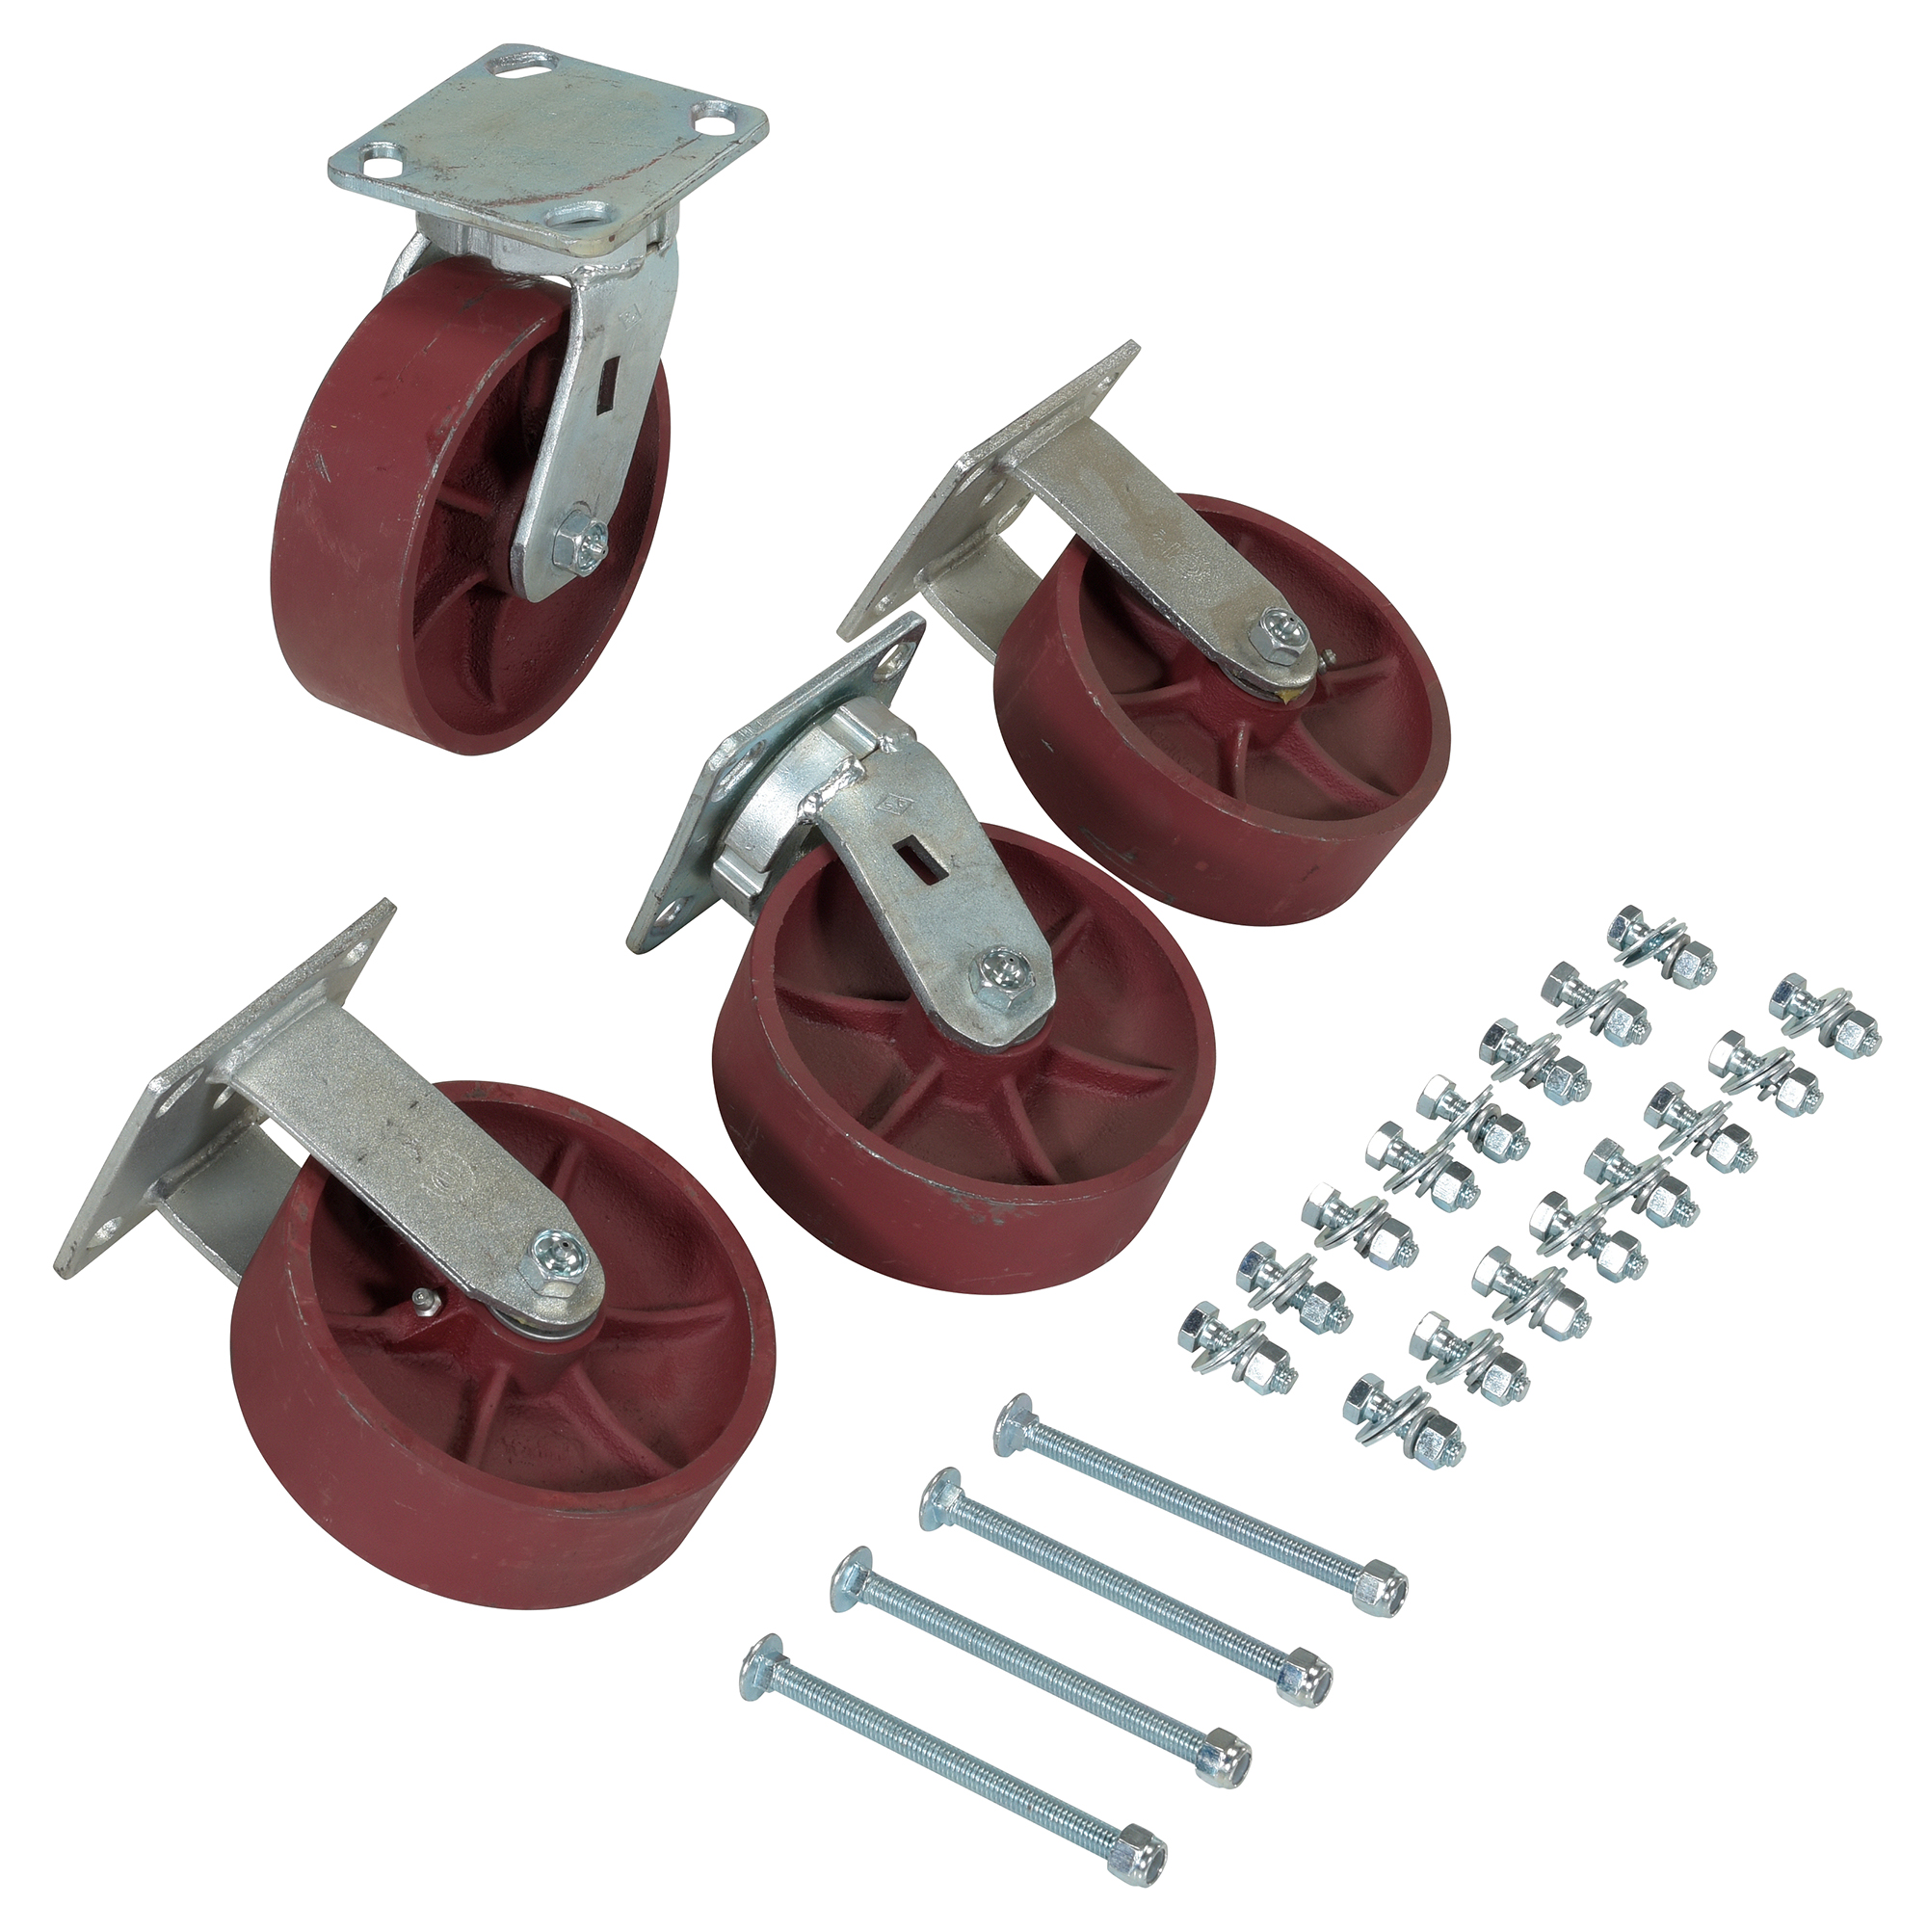 Ductile Steel Caster Kit, 6 x 2 Inch Size, 8000 Lb. Capacity